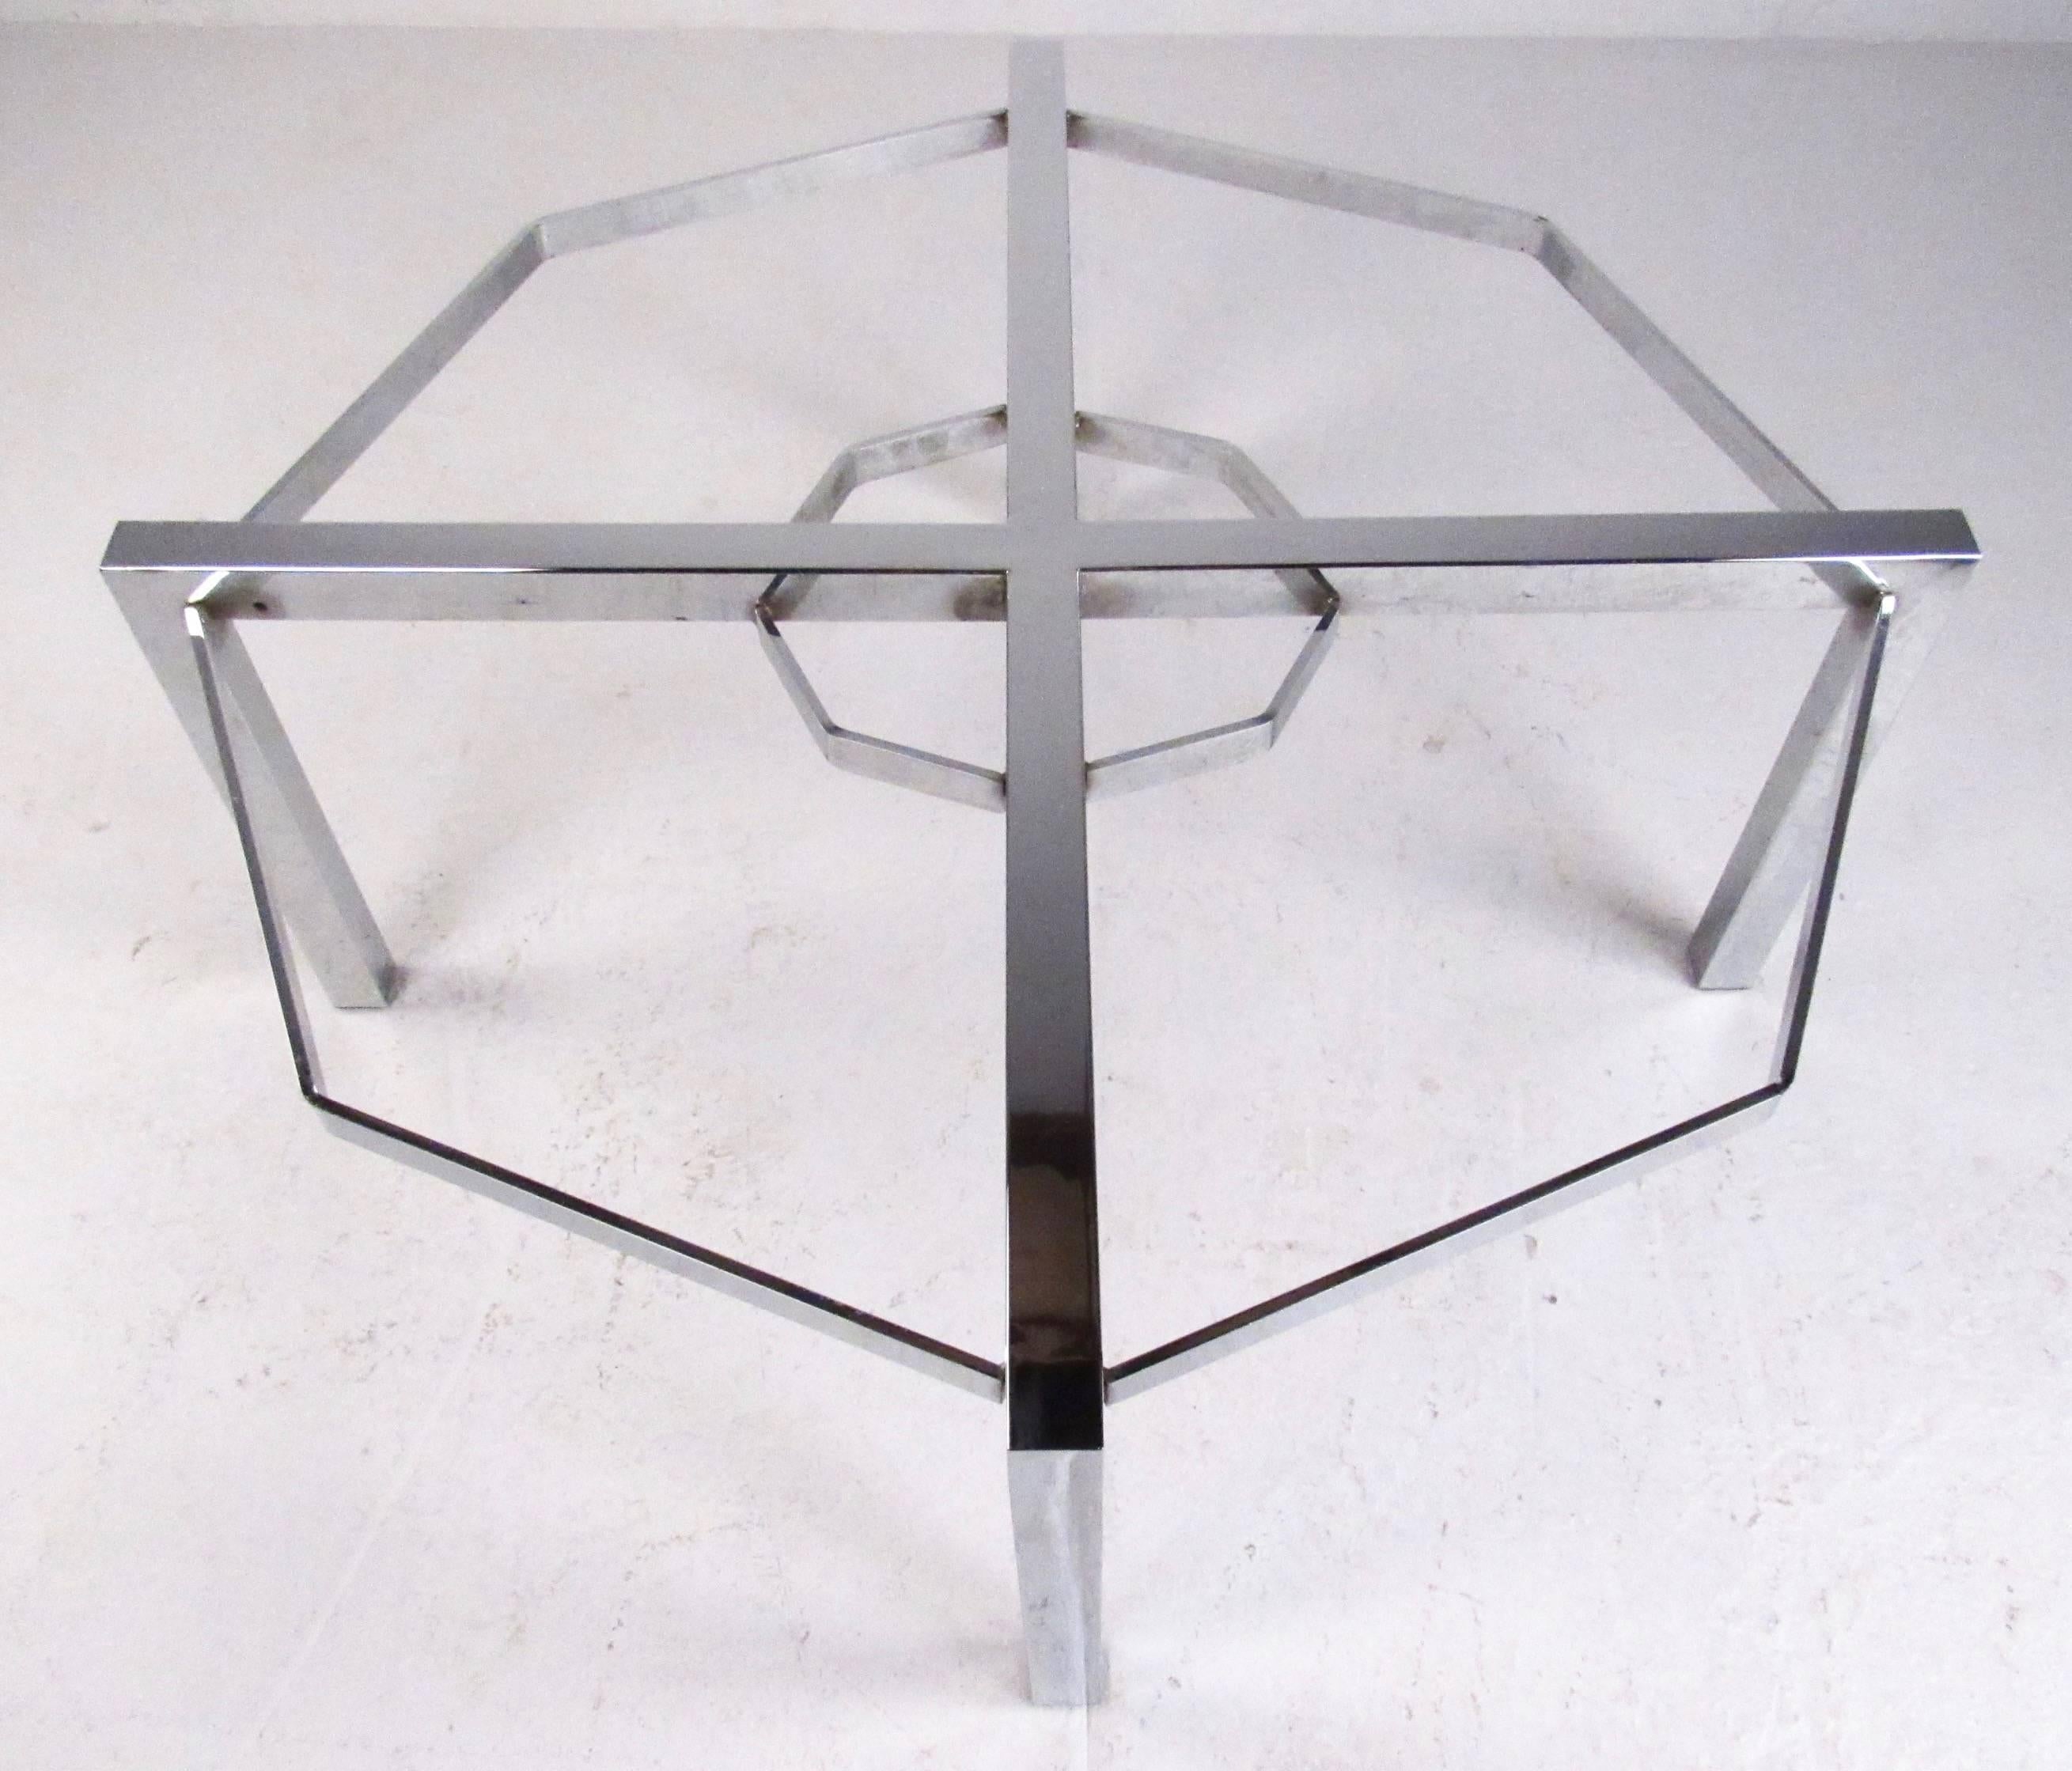 Contemporary Modern Chrome and Marble Circular Coffee Table im Zustand „Gut“ im Angebot in Brooklyn, NY